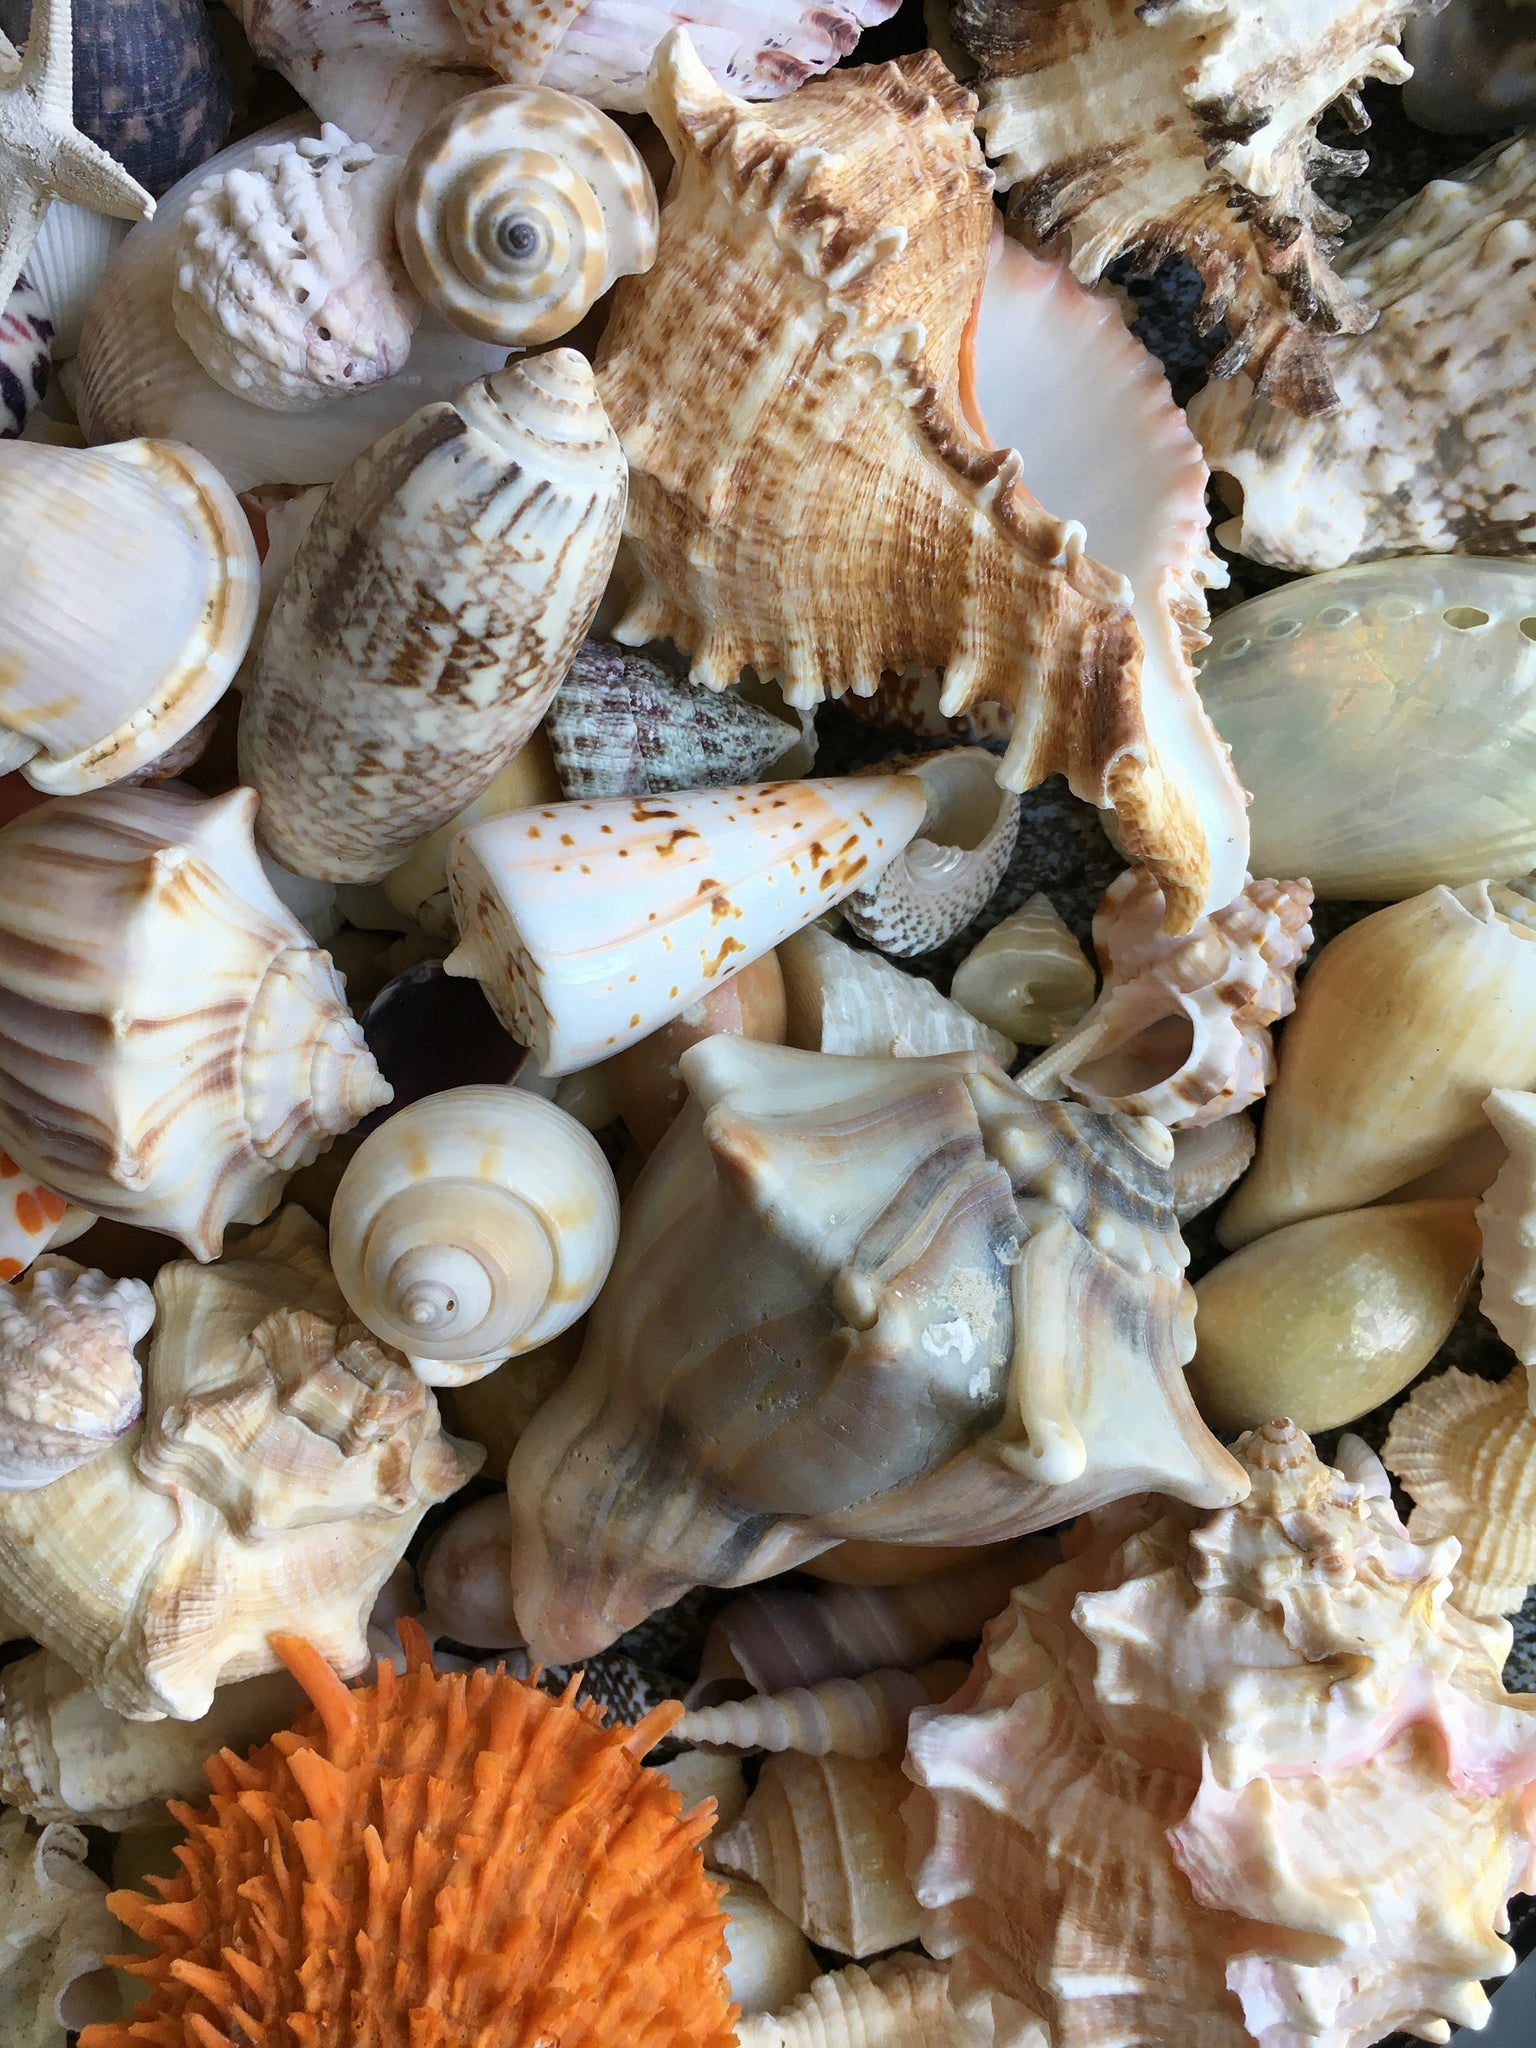 Lot of Handpicked Sea Shells for Decoration or Crafts Almost 3lbs on eBid  United States